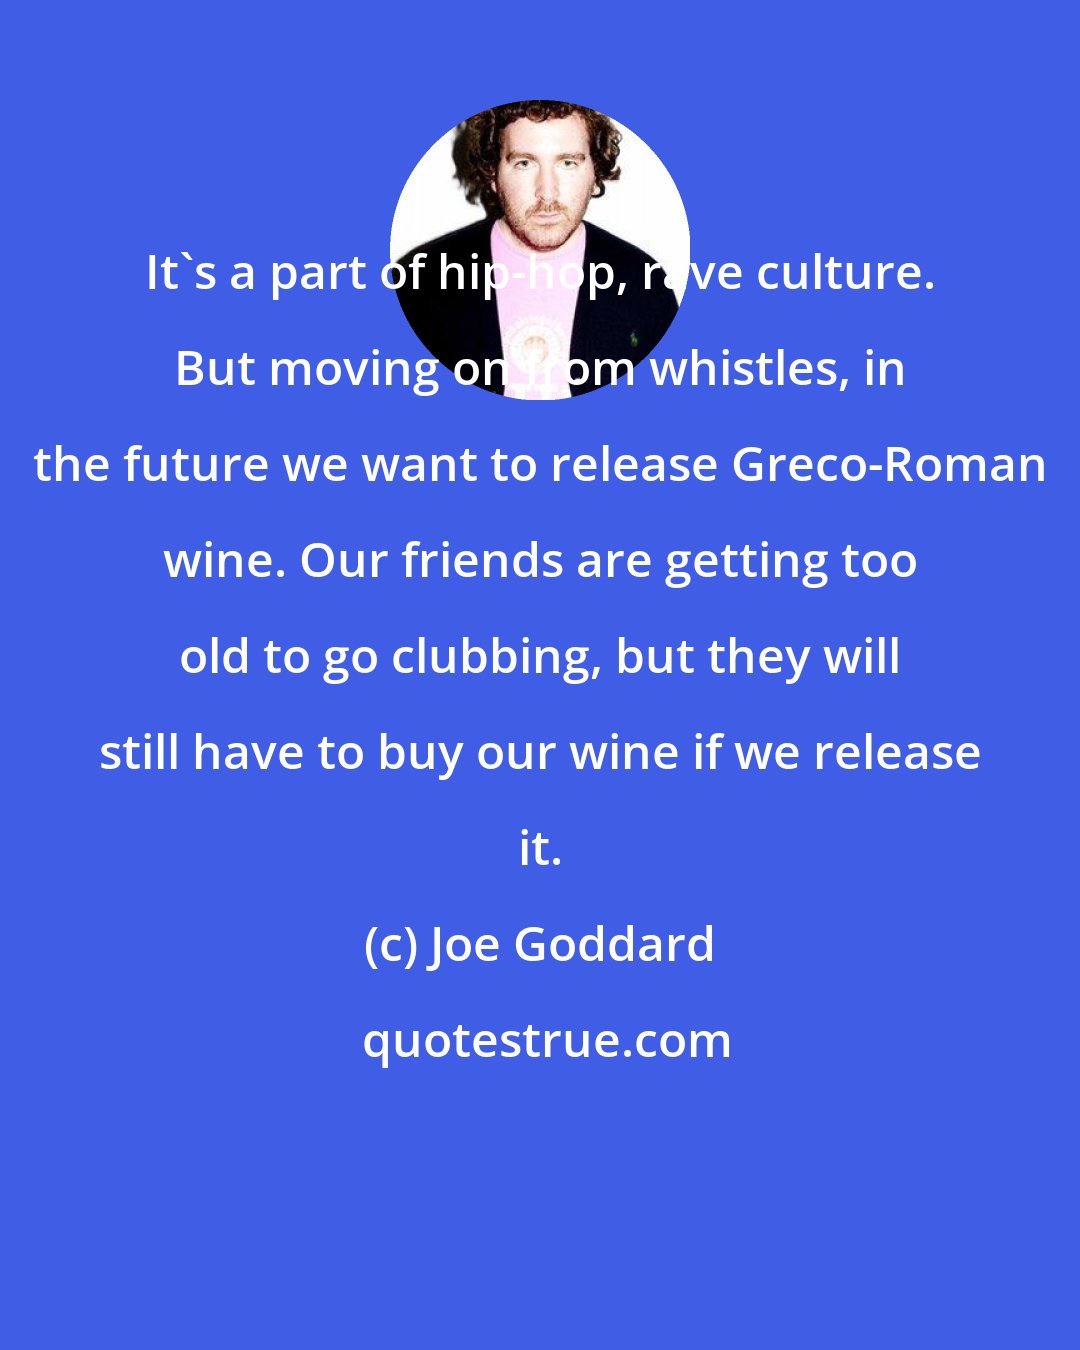 Joe Goddard: It's a part of hip-hop, rave culture. But moving on from whistles, in the future we want to release Greco-Roman wine. Our friends are getting too old to go clubbing, but they will still have to buy our wine if we release it.